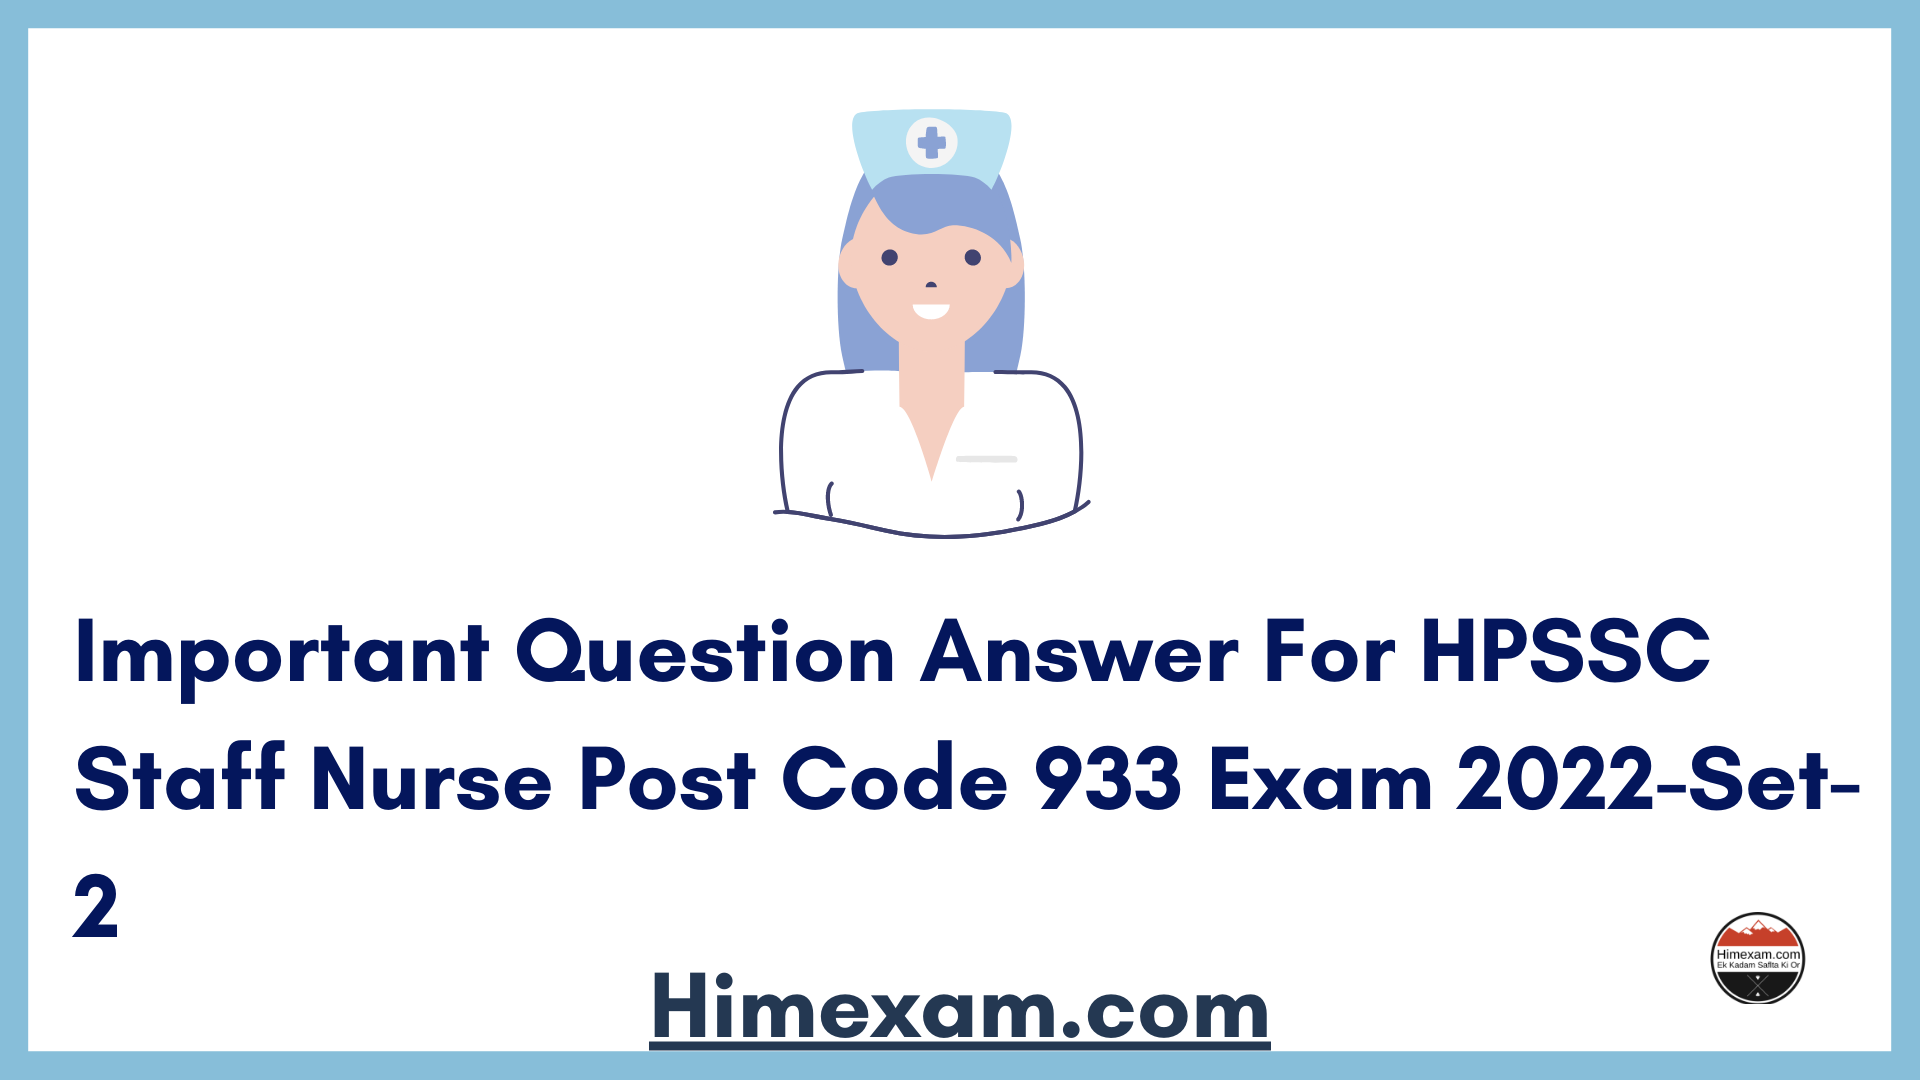 Important Question Answer  For HPSSC Staff Nurse Post Code 933 Exam 2022-Set-2